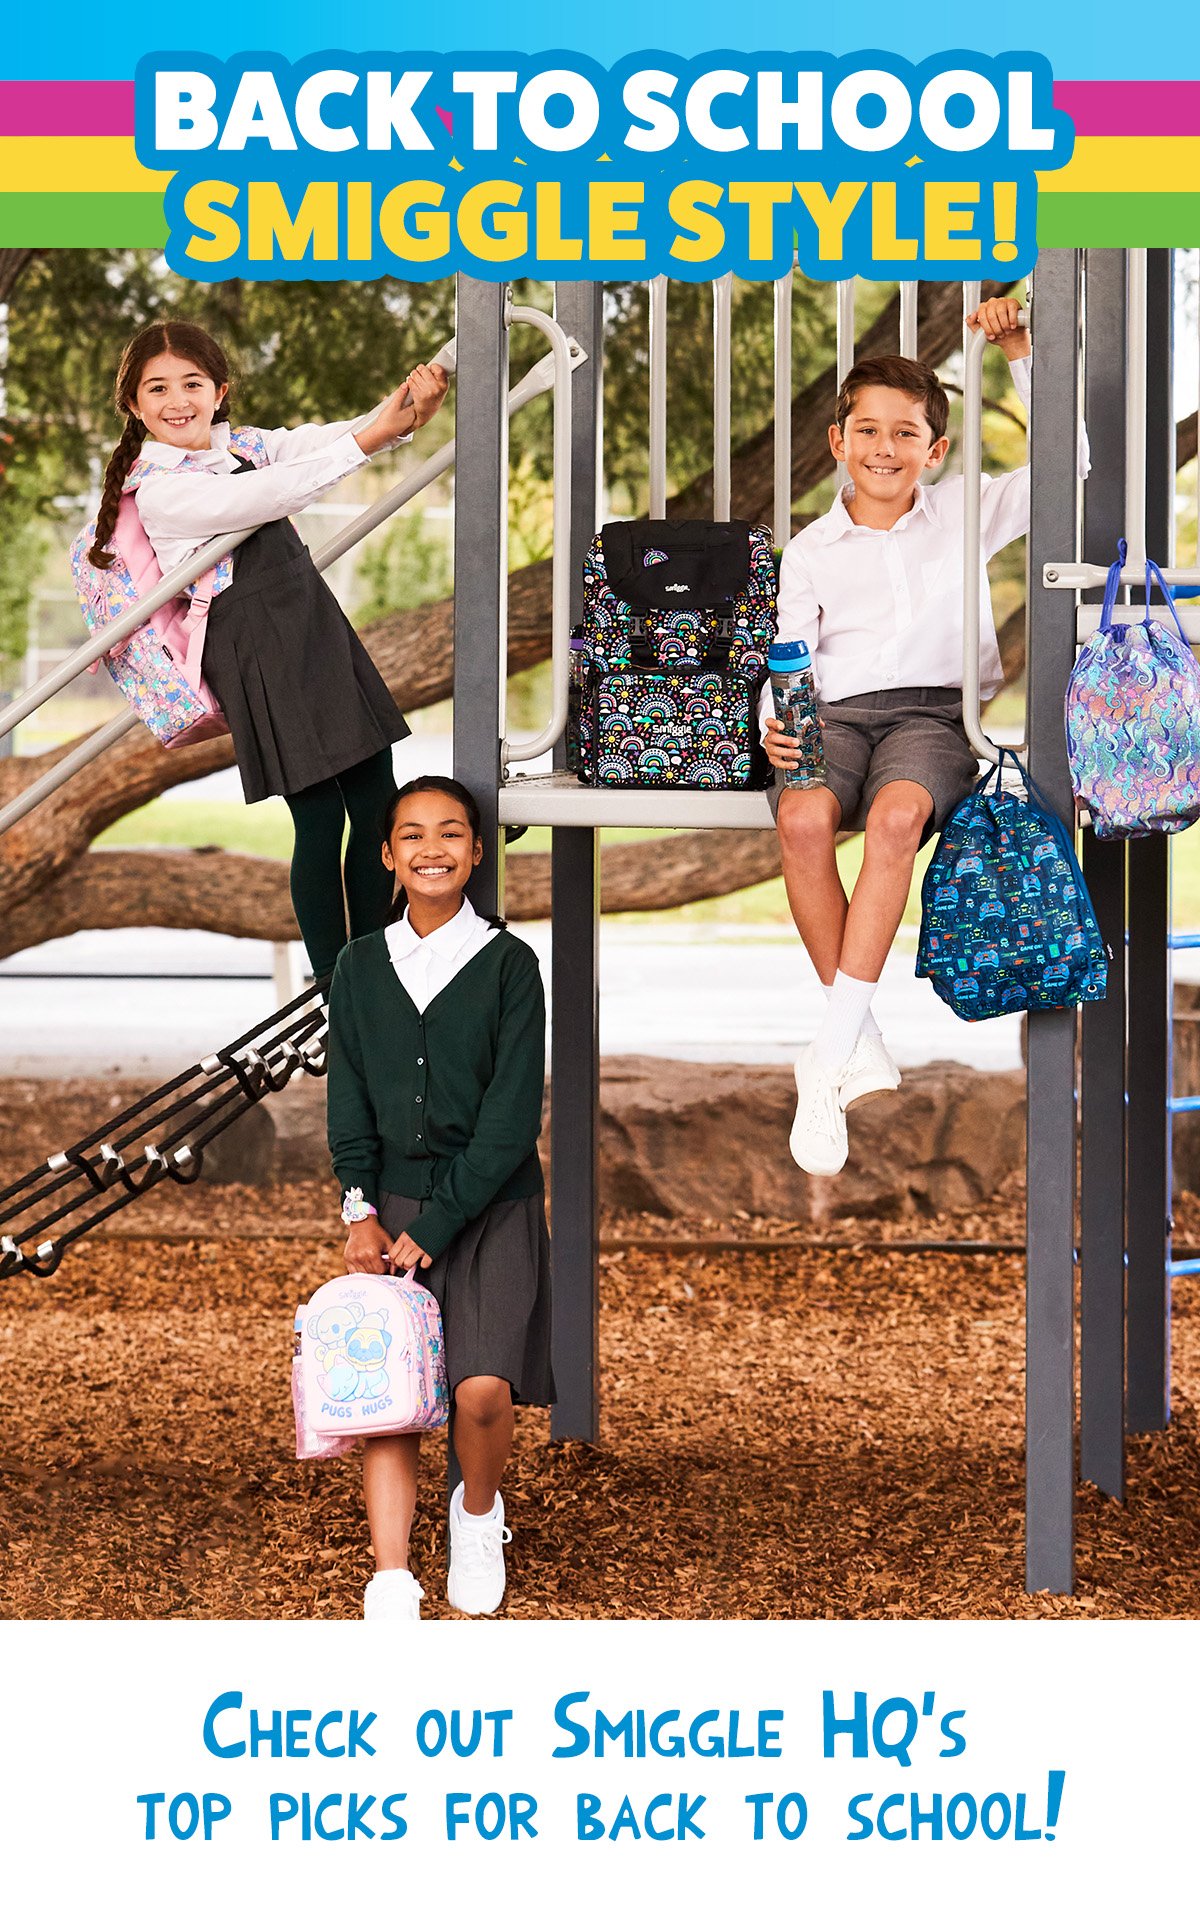 Back to School with Smiggle